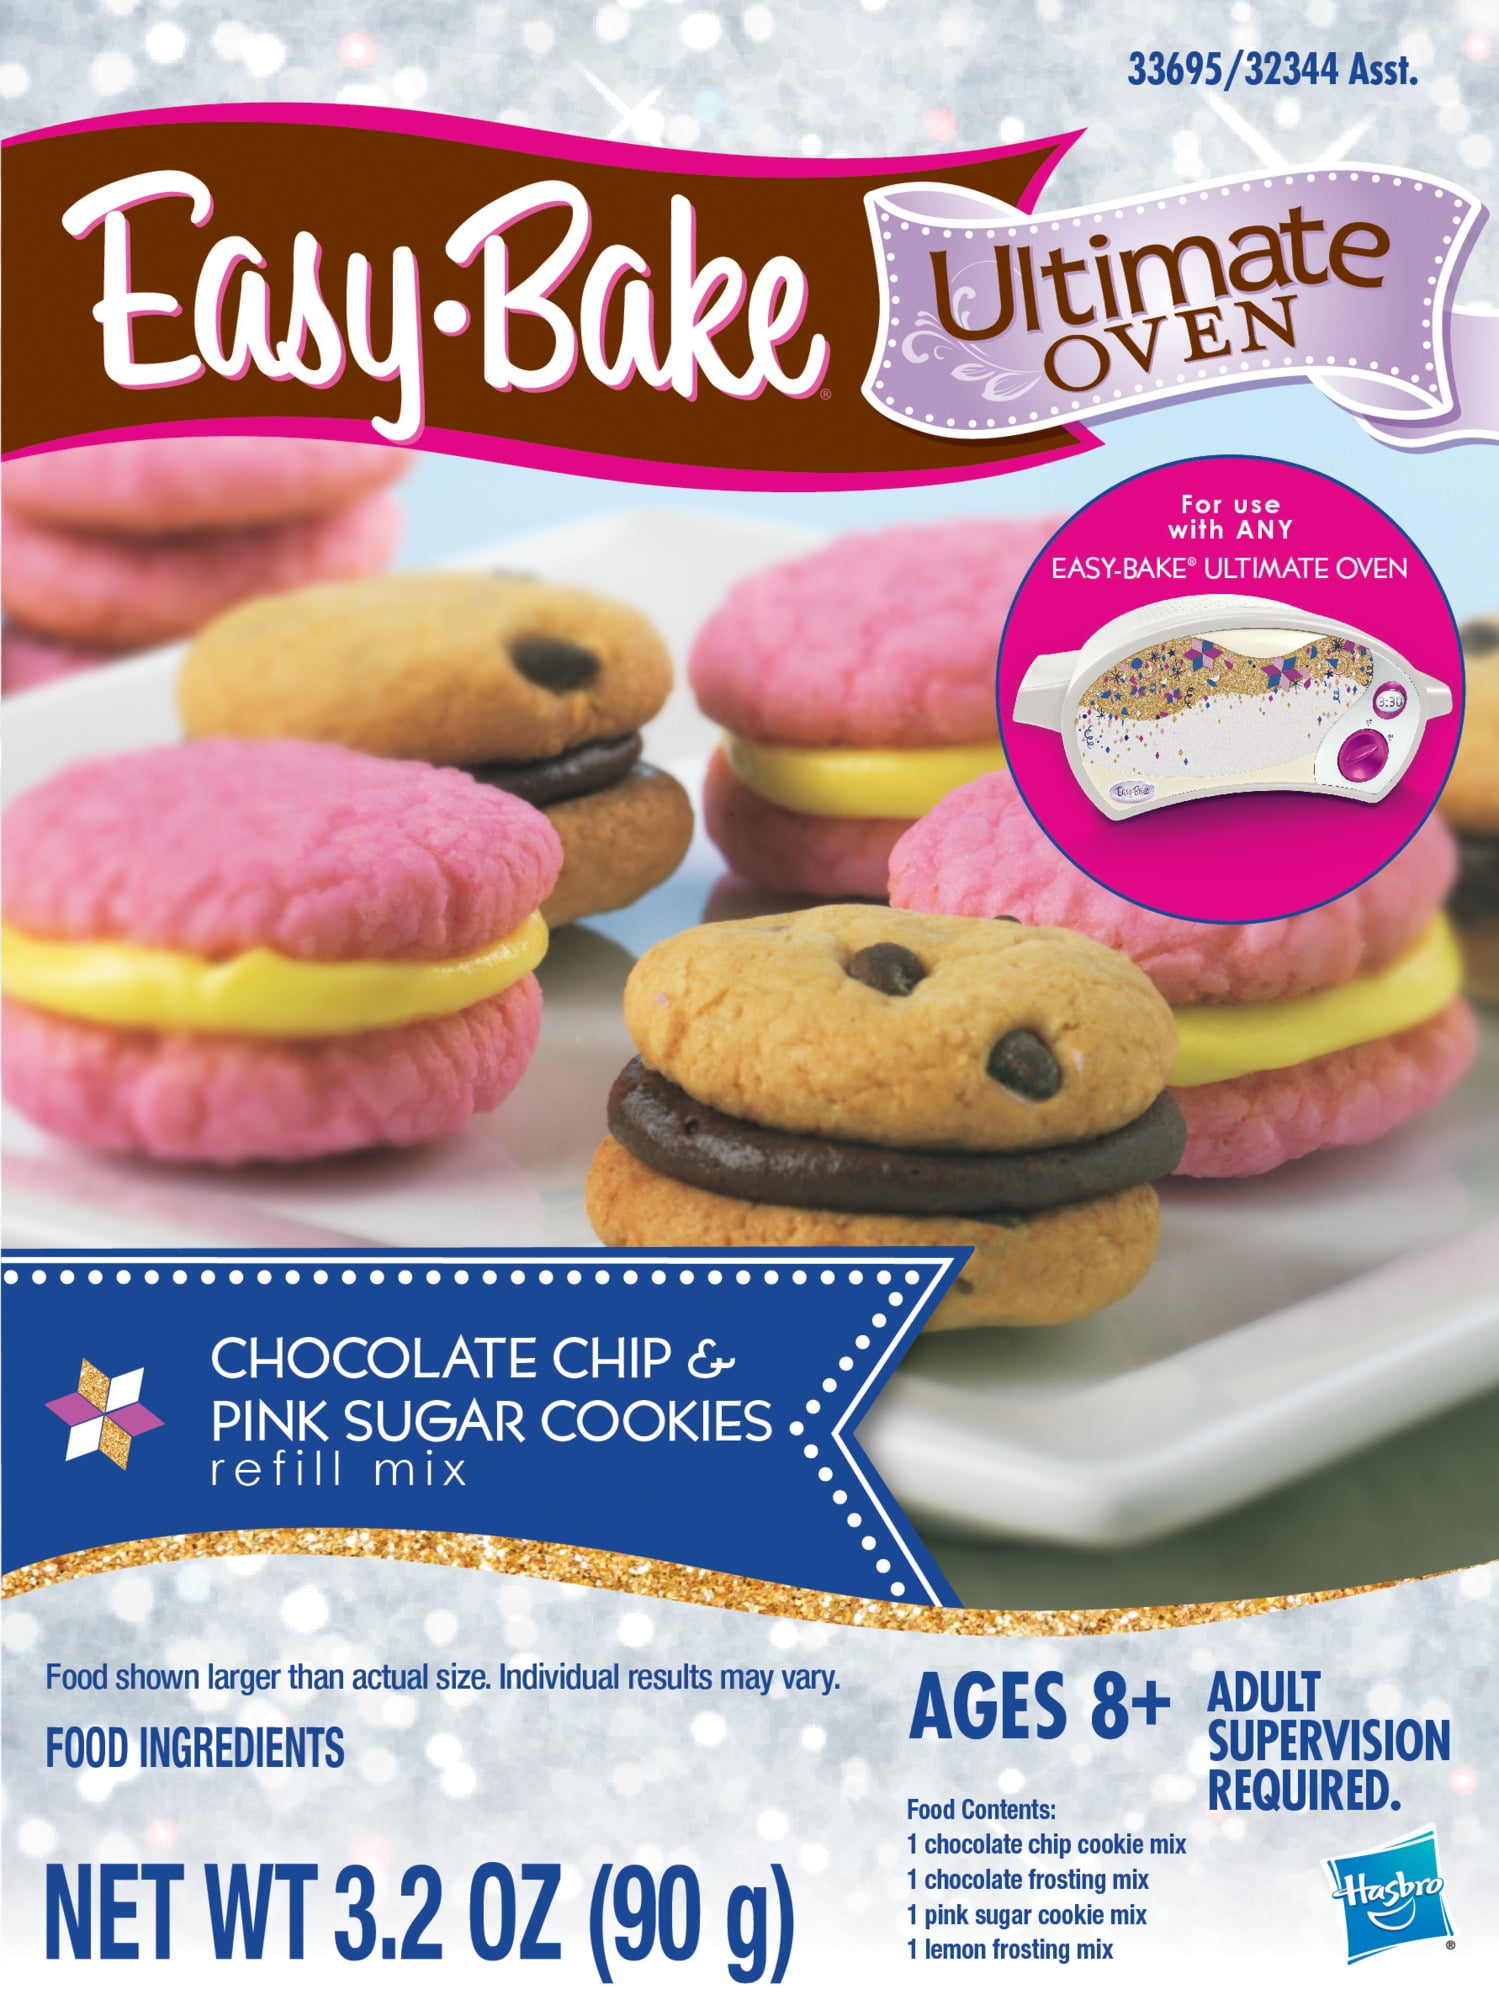 Easy-Bake Ultimate Oven Chocolate Chip & Pink Sugar Cookies Refill Mix 